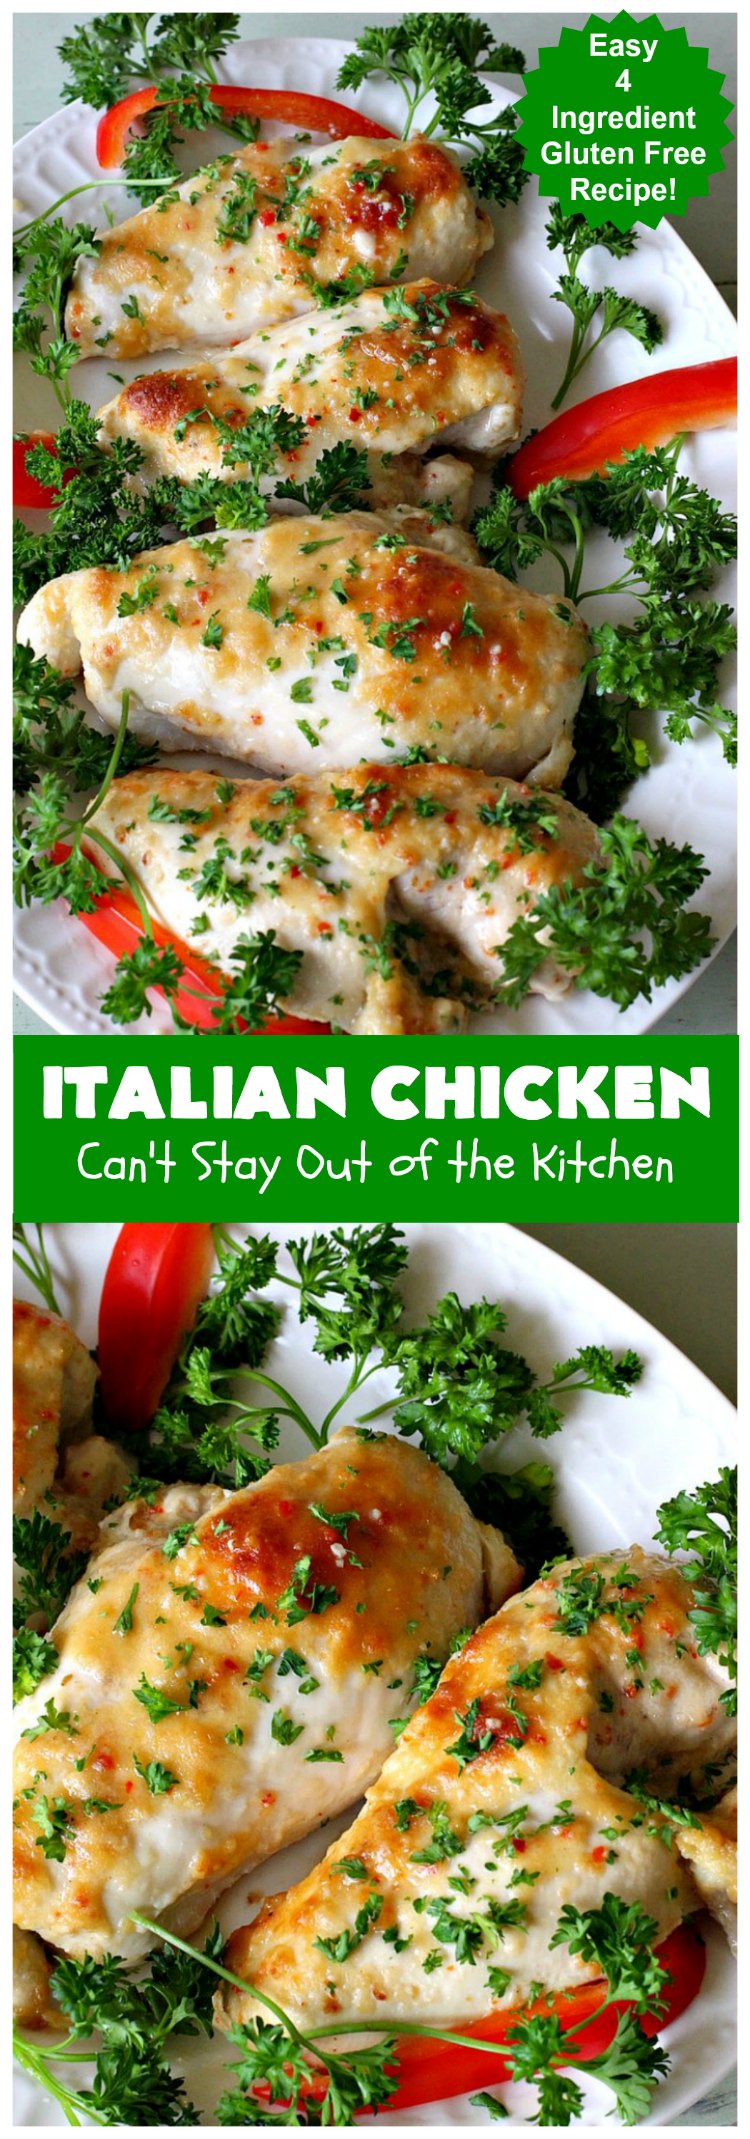 Italian Chicken | Can't Stay Out of the Kitchen | this quick & easy 4-ingredient #chicken entree is perfect for weeknight dinners when you're short on time. Tasty & delicious. #Italian #GlutenFree #ItalianChicken